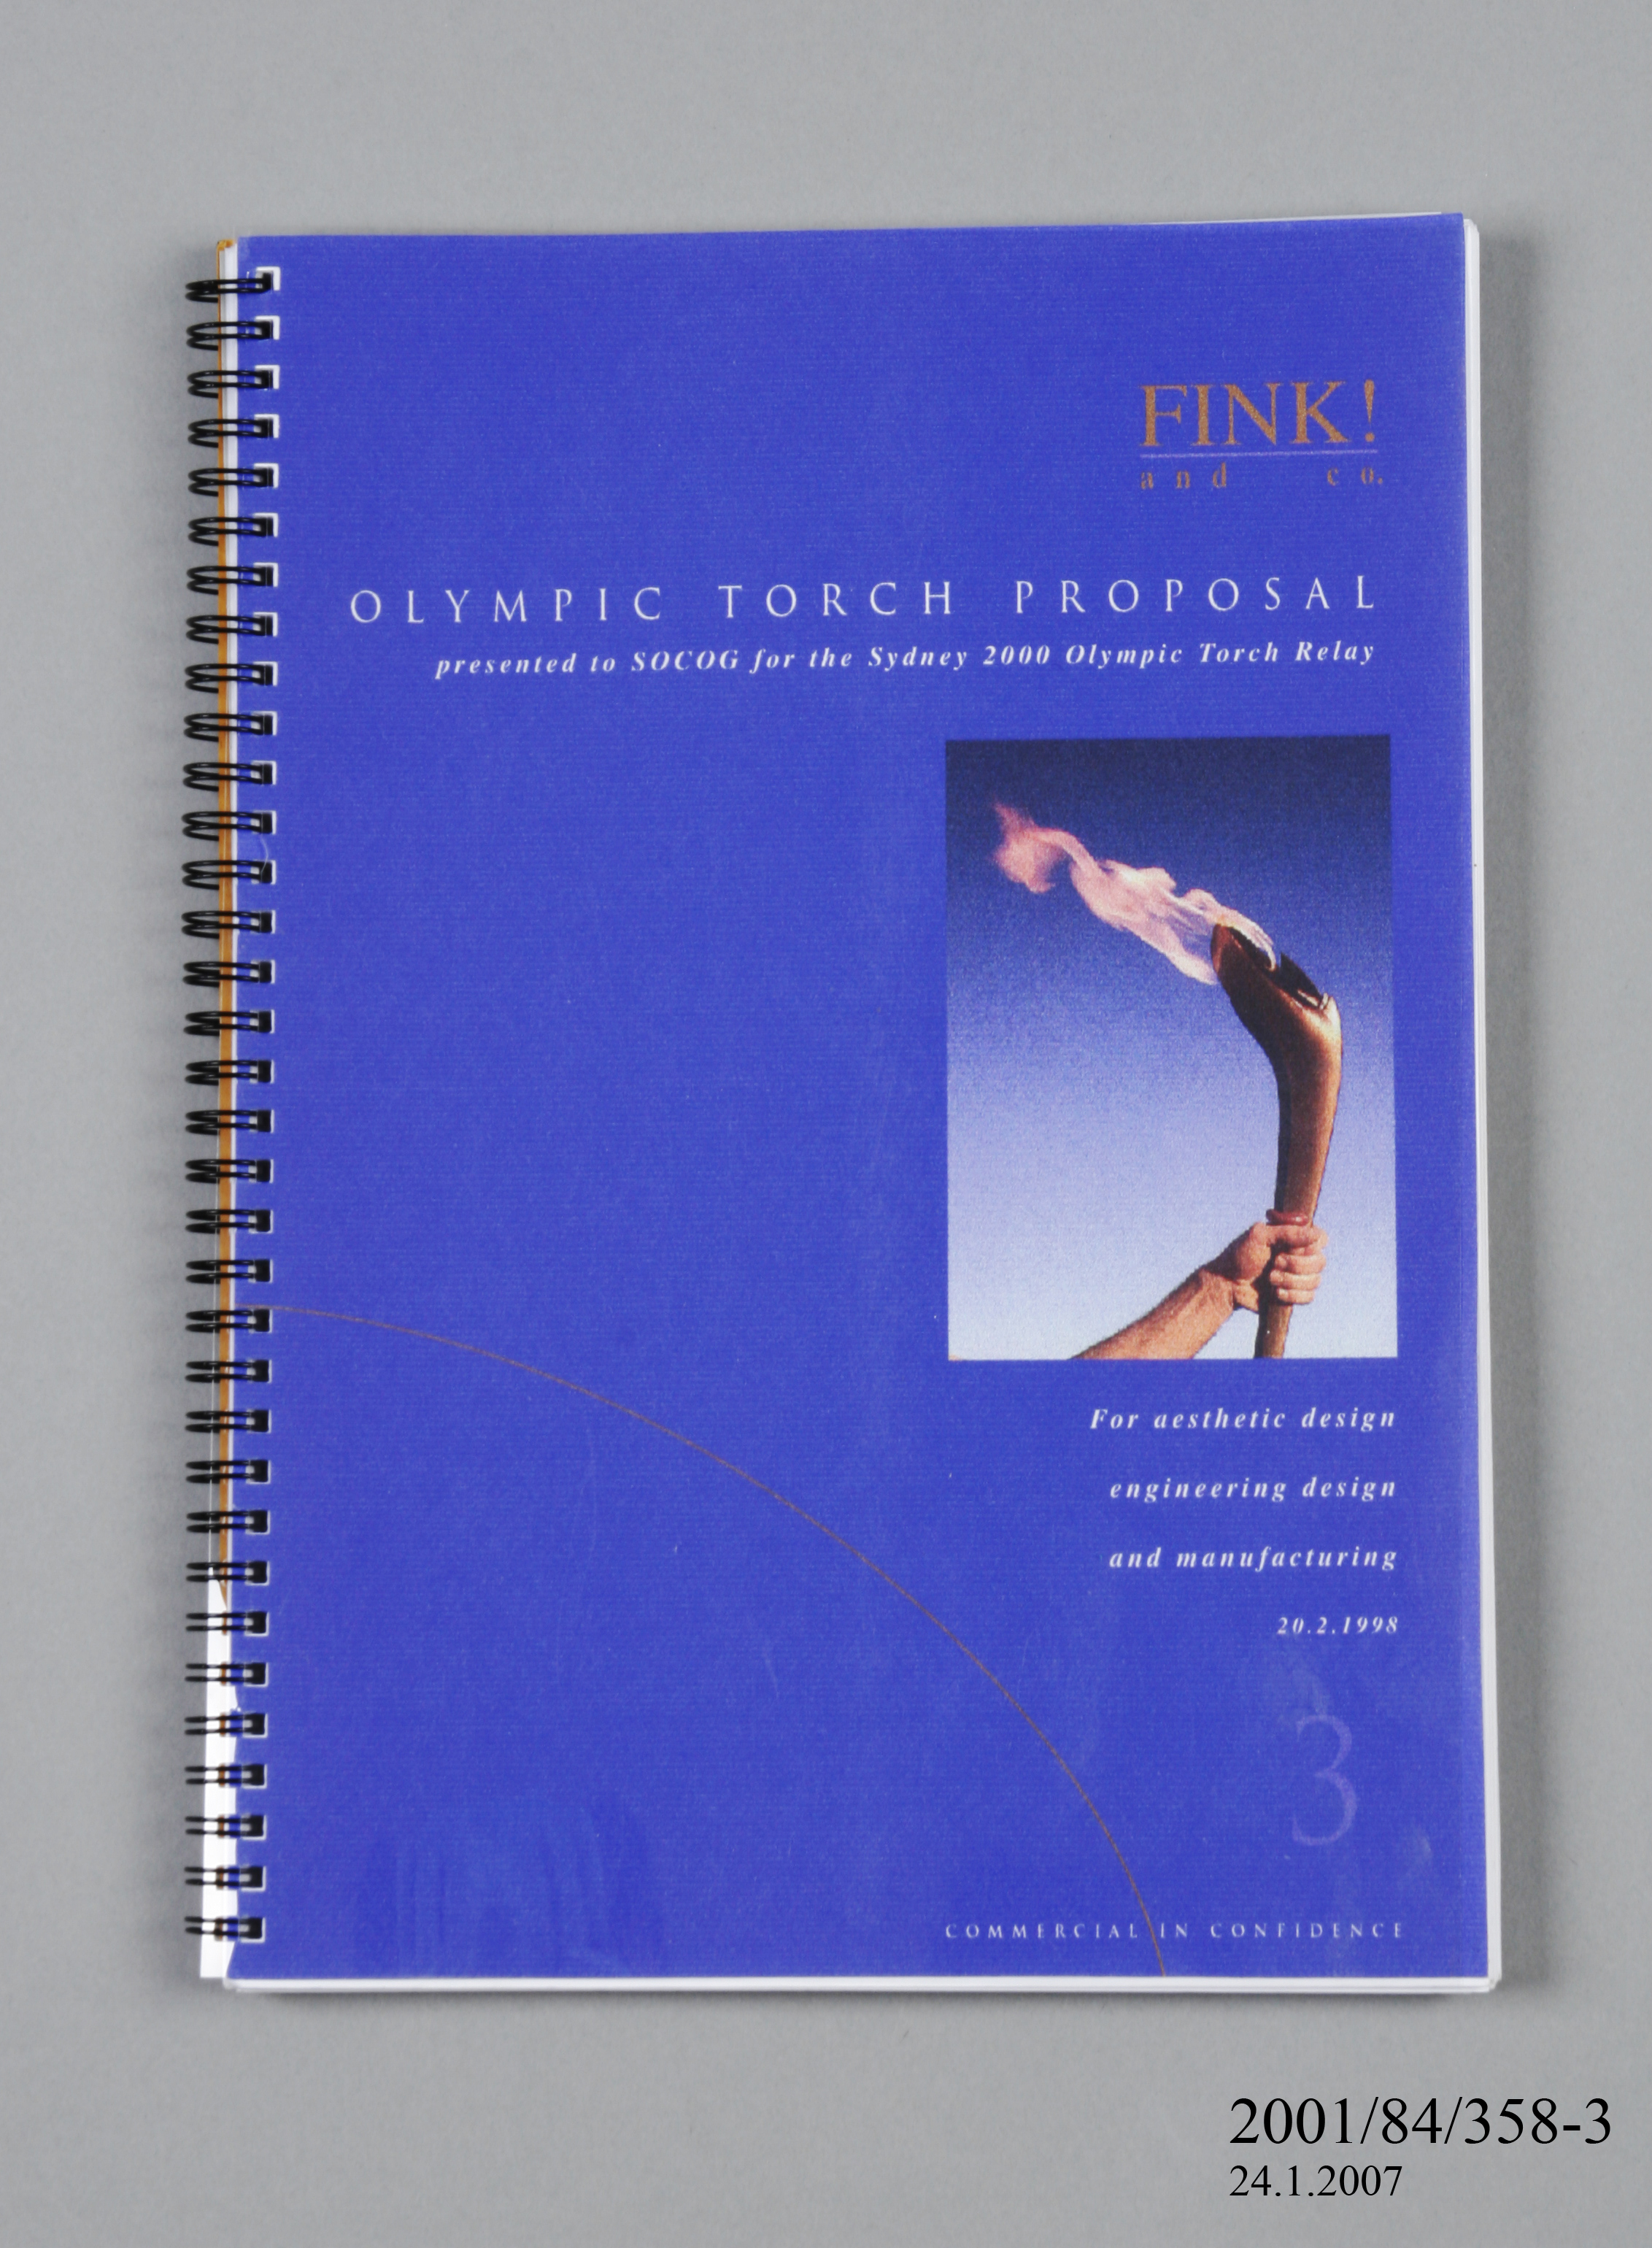 Sydney 2000 Olympic and Paralympic Games torch prototypes